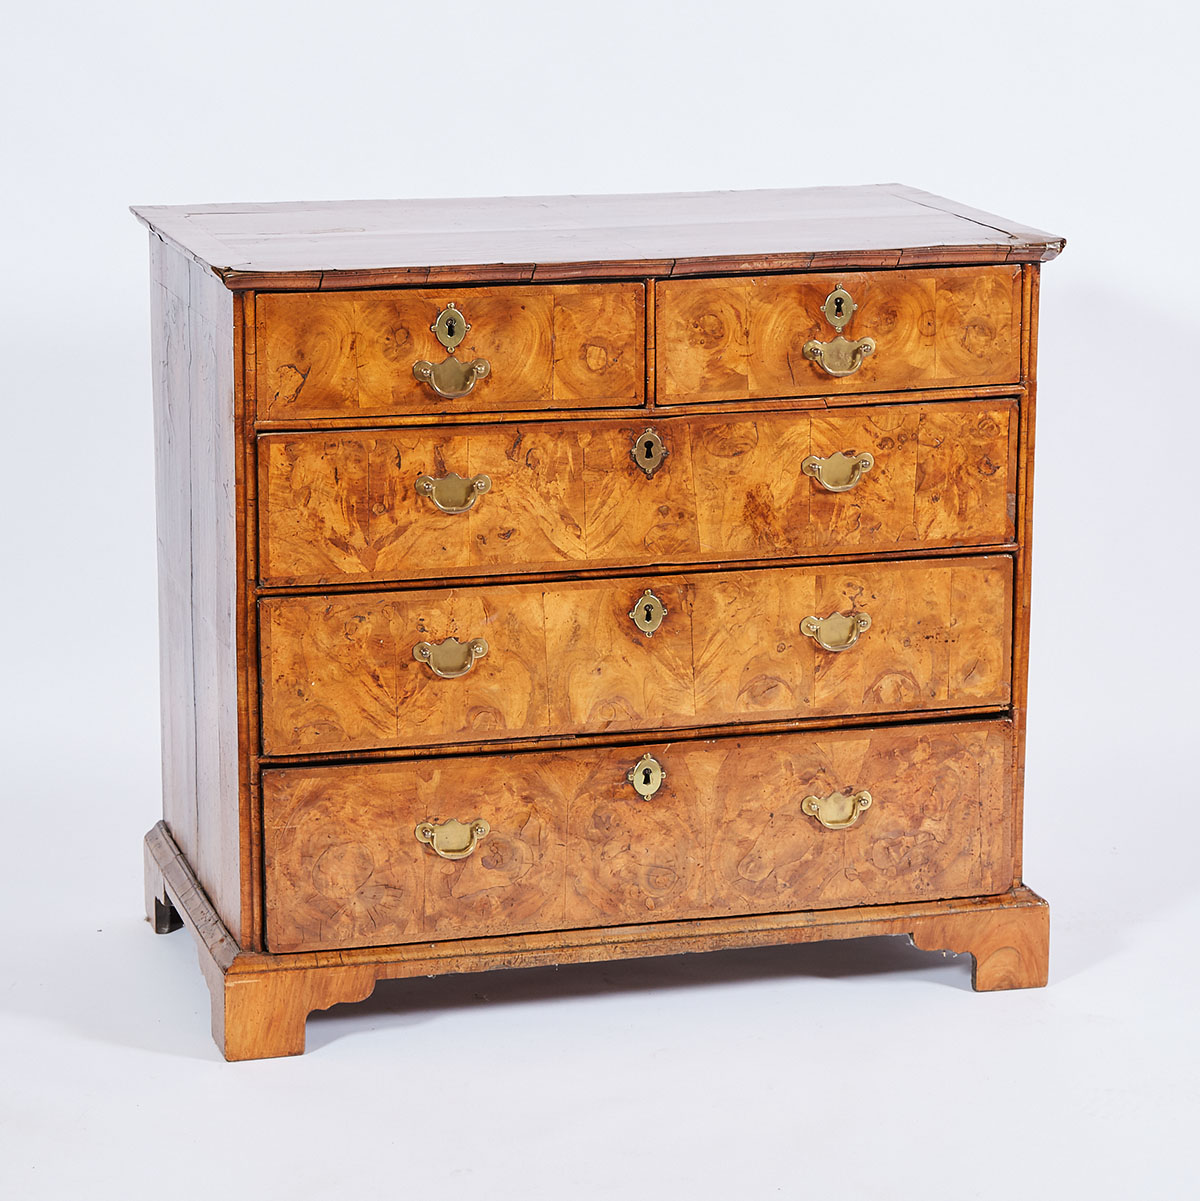 George I Walnut and Oyster Veneered Chest of Drawers, early 18th century